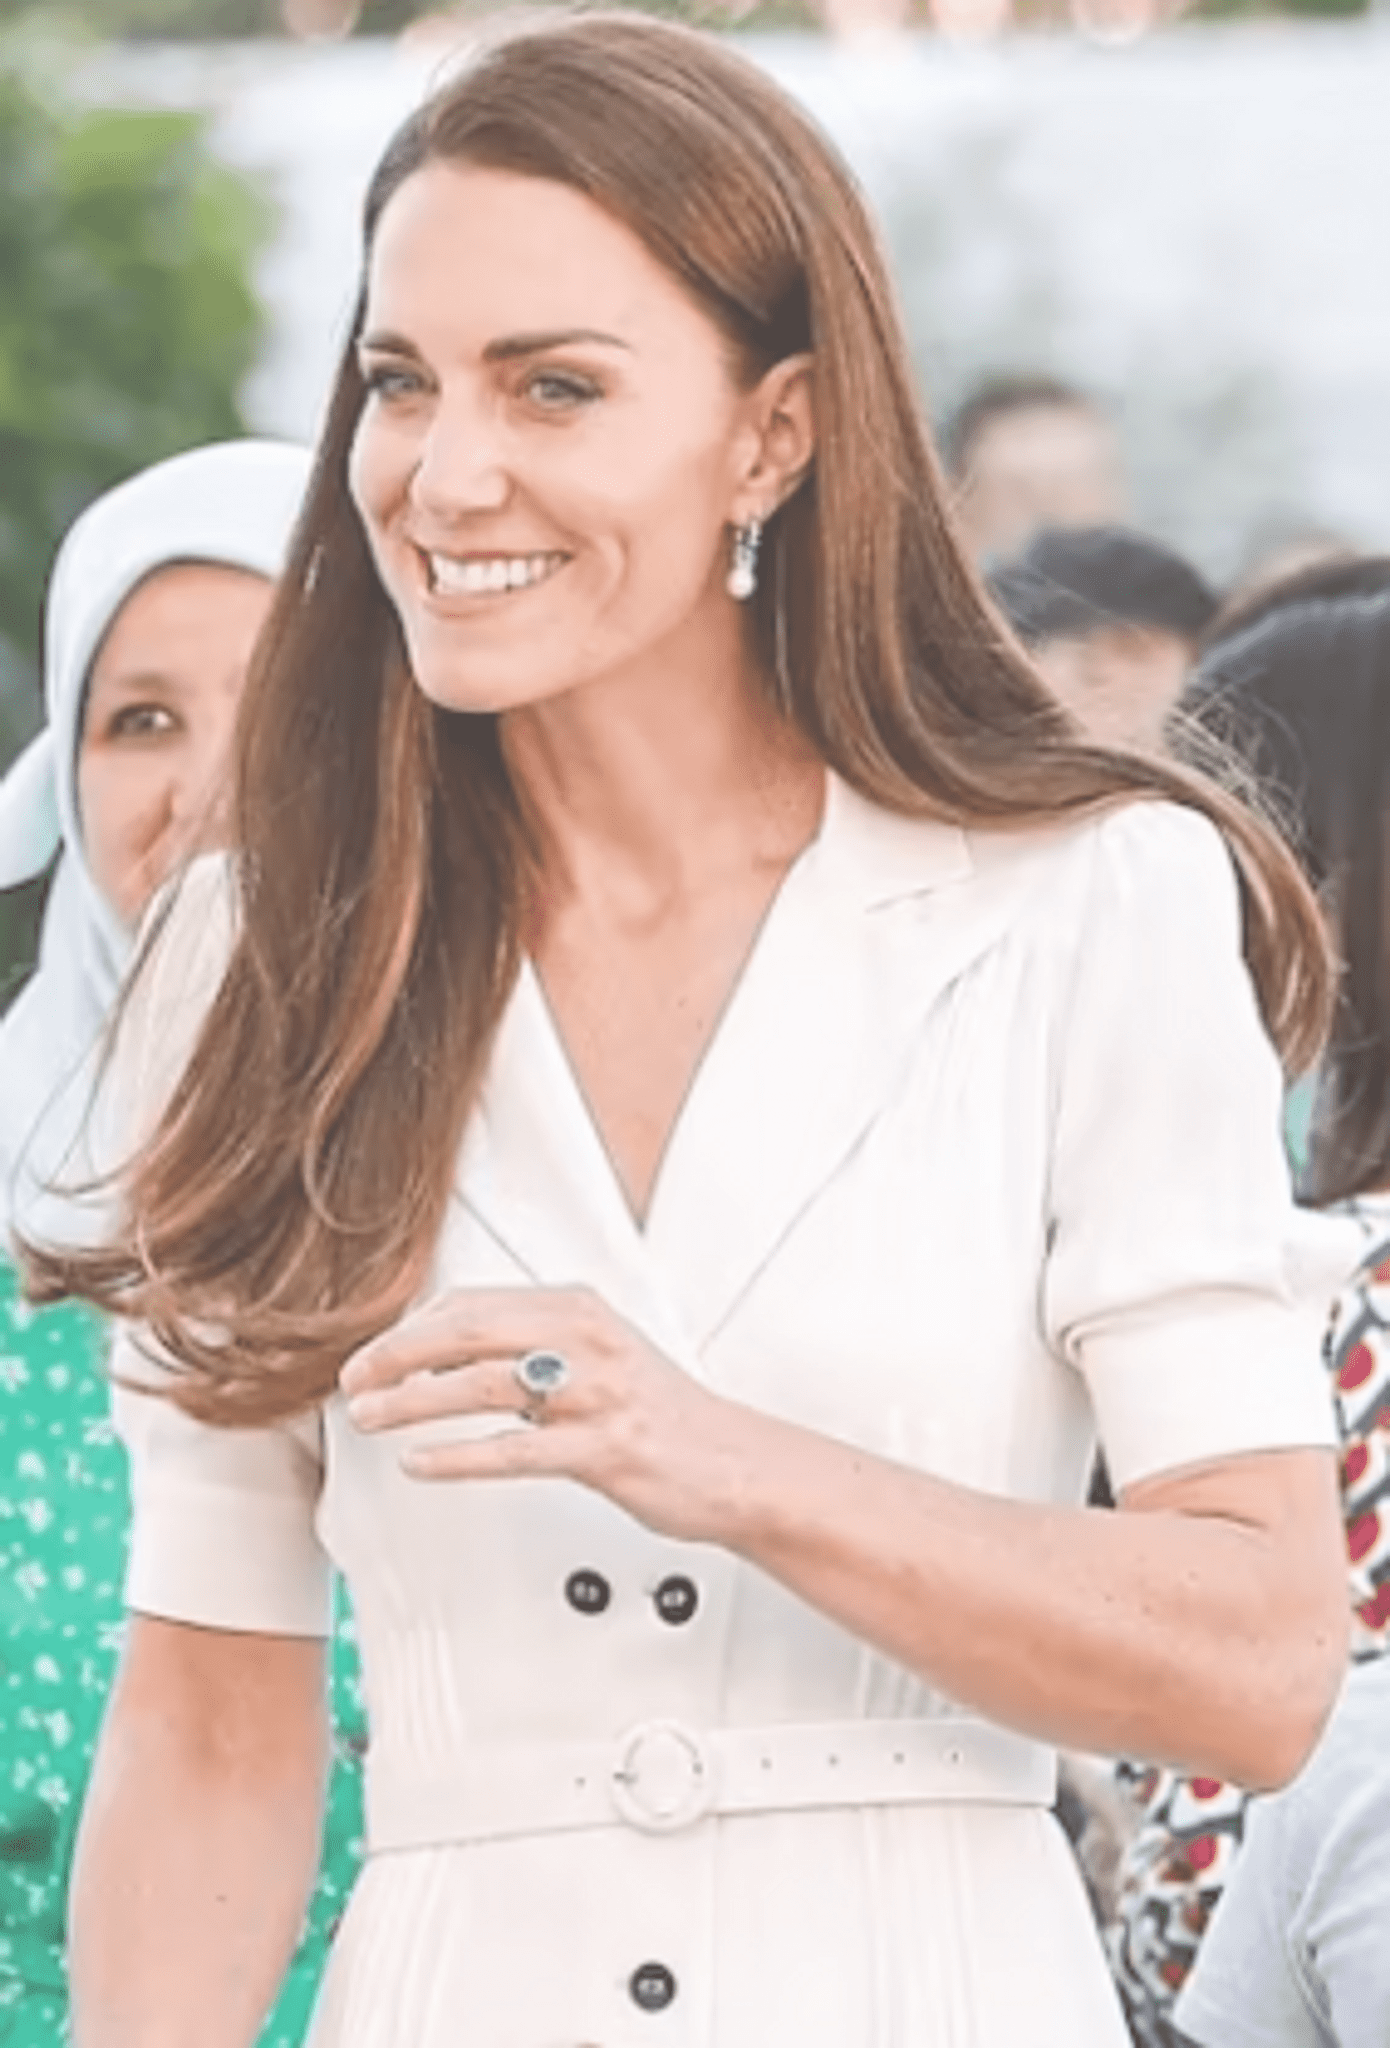 Look at Kate Middleton in a white dress perfect for summer outings